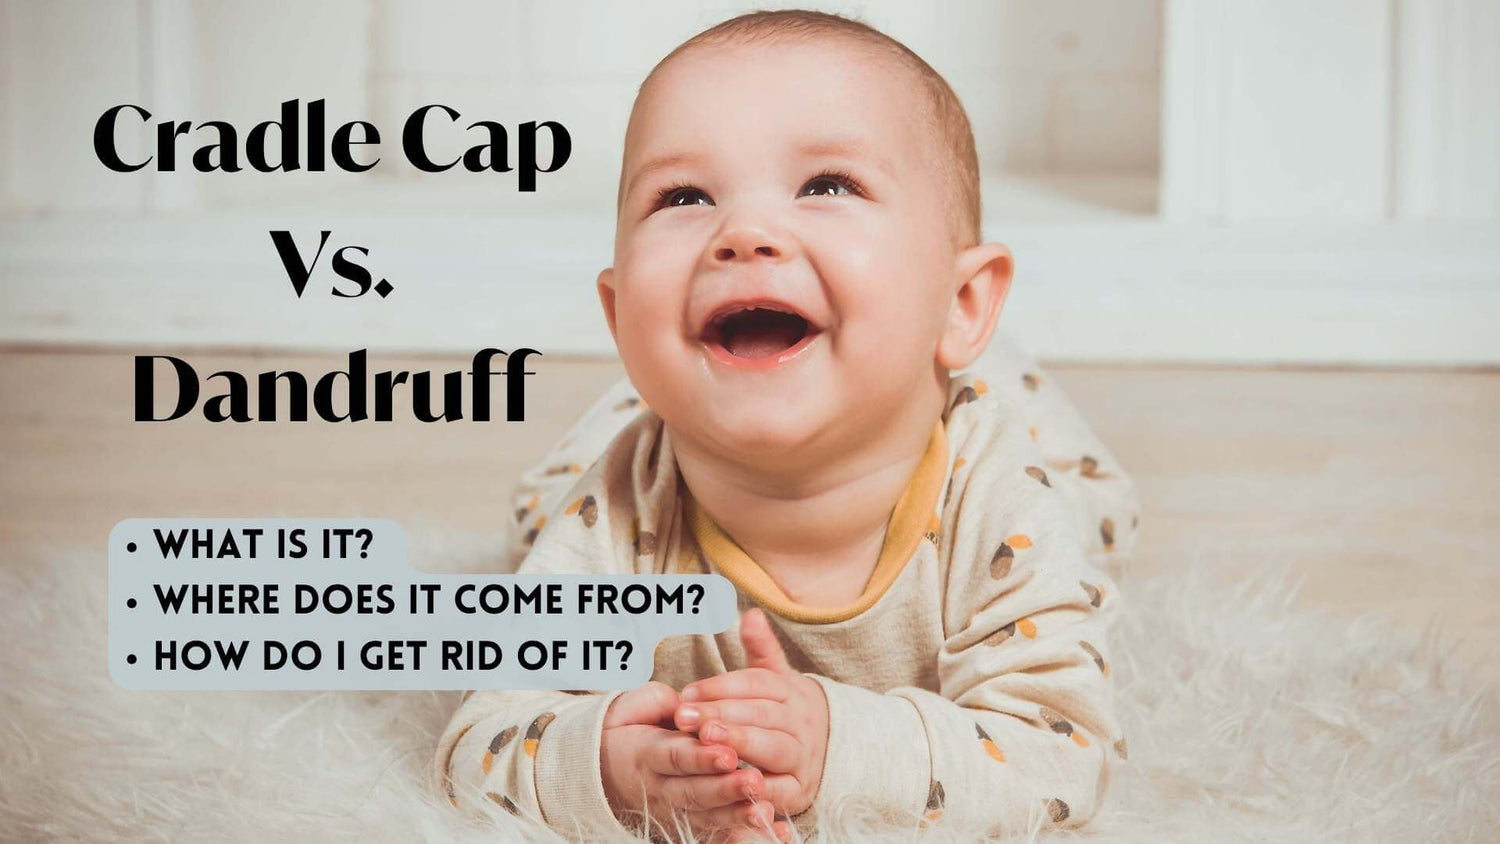 Cradle Cap Vs. Dandruff: Everything you need to know